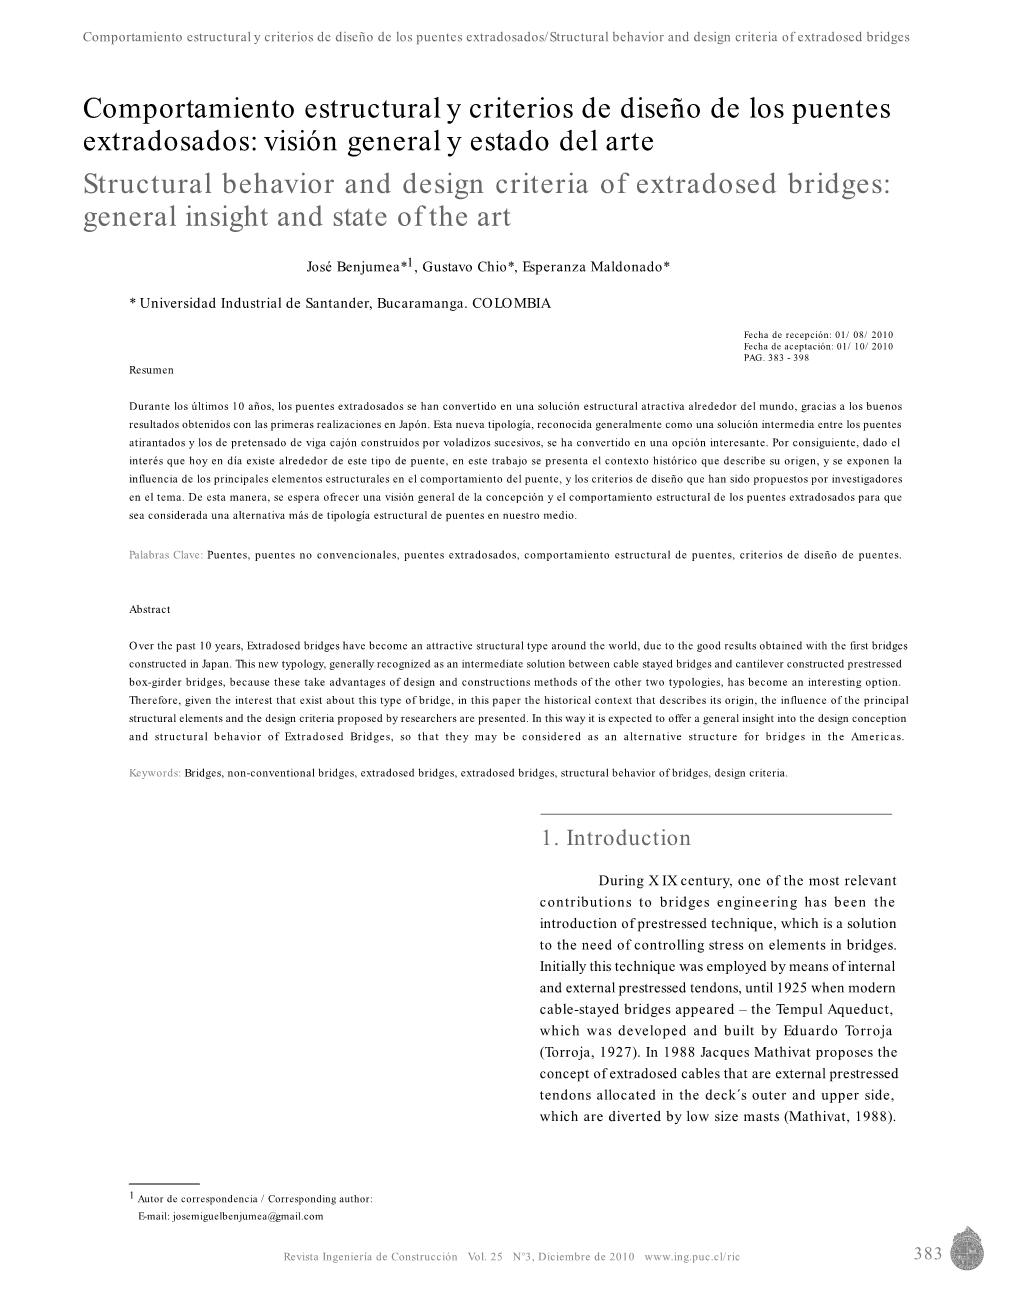 Structural Behavior and Design Criteria of Extradosed Bridges: General Insight and State of the Art